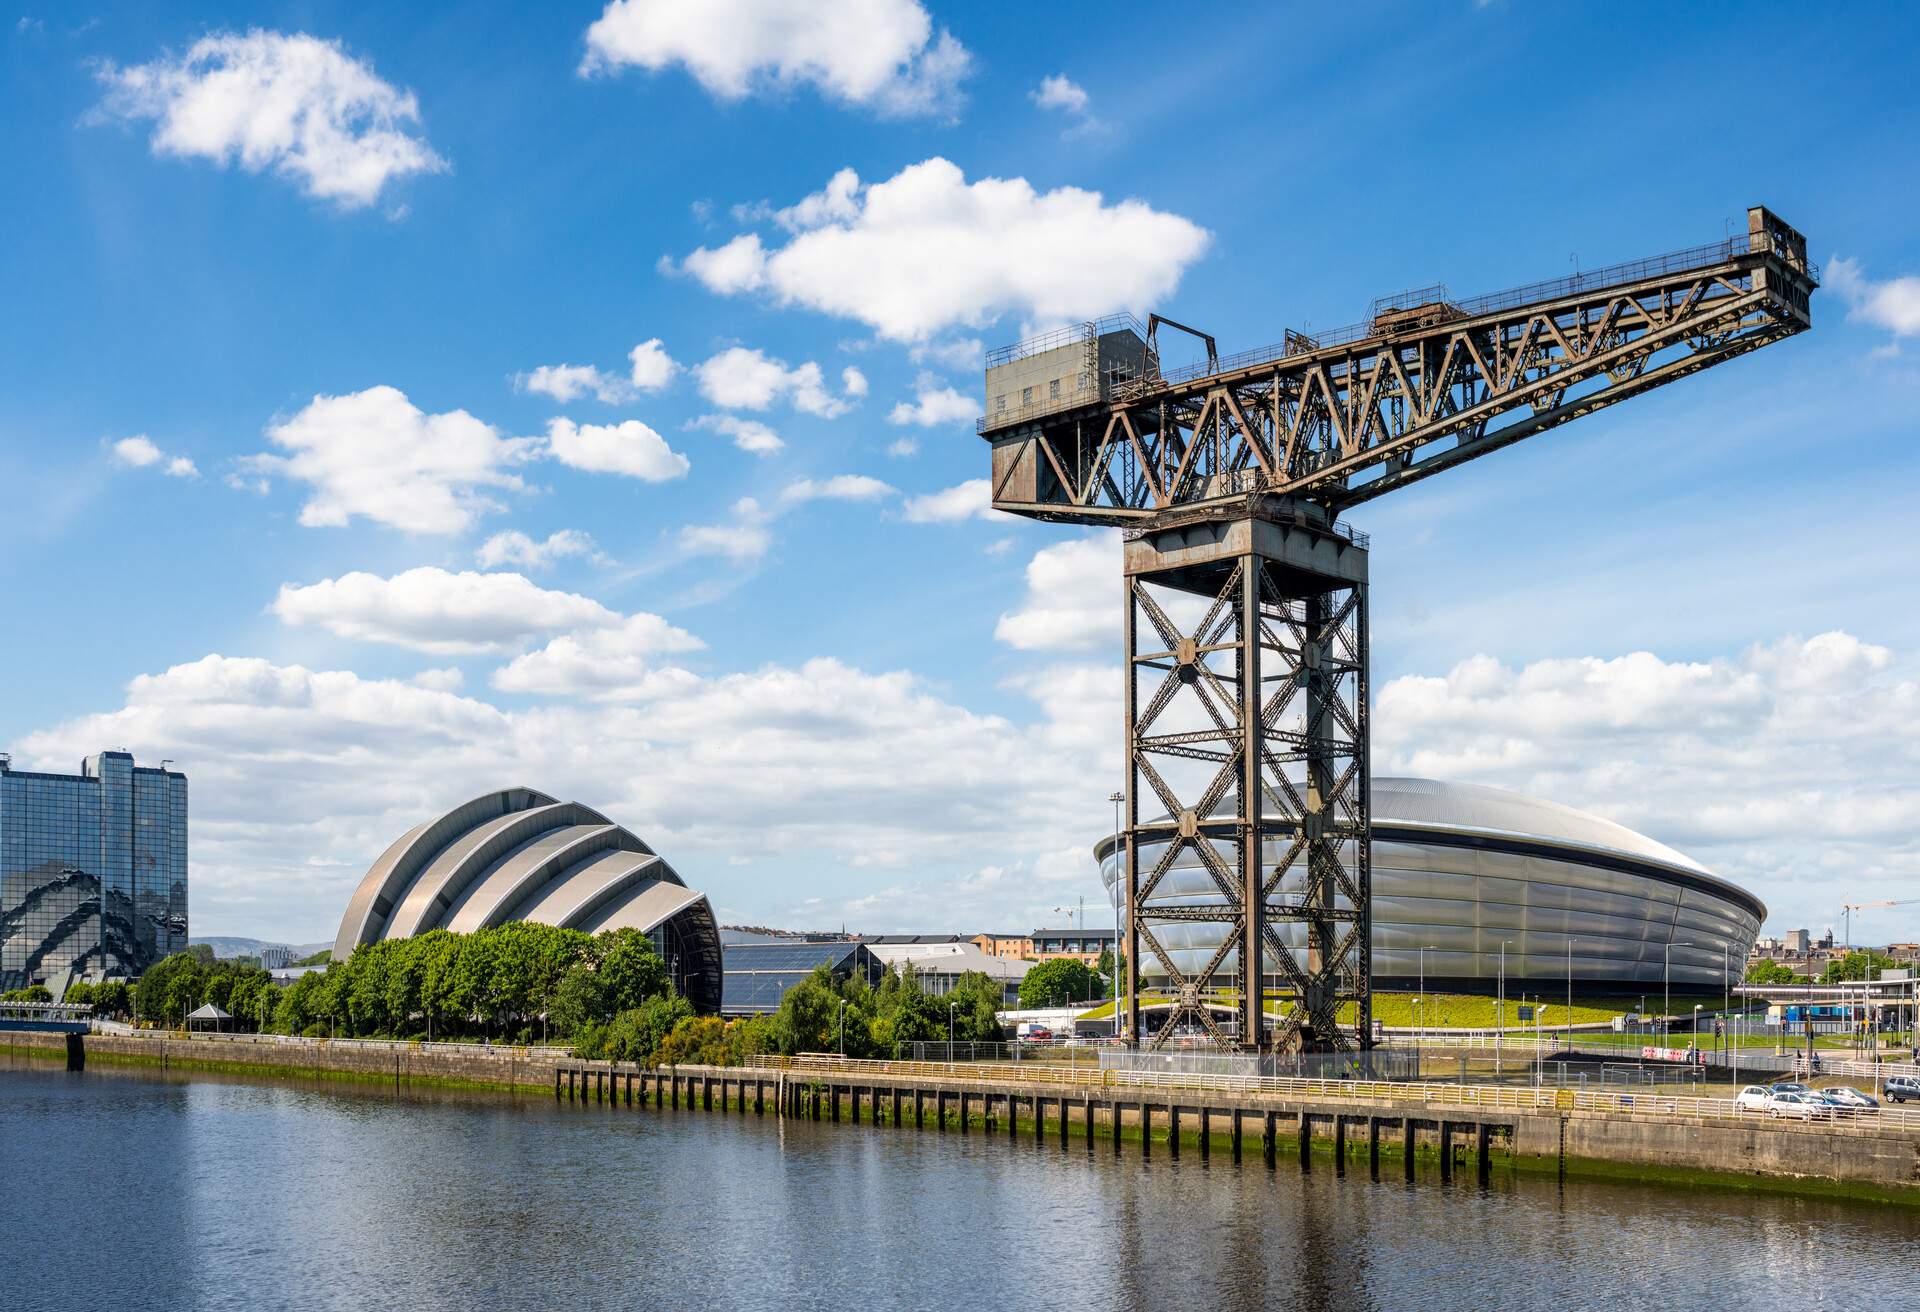 A panoramic view along the north bank of the River Clyde in Glasgow, with hotels, the Hydro, the Armadillo and with the skyline dominated by the historic Finnieston Crane.